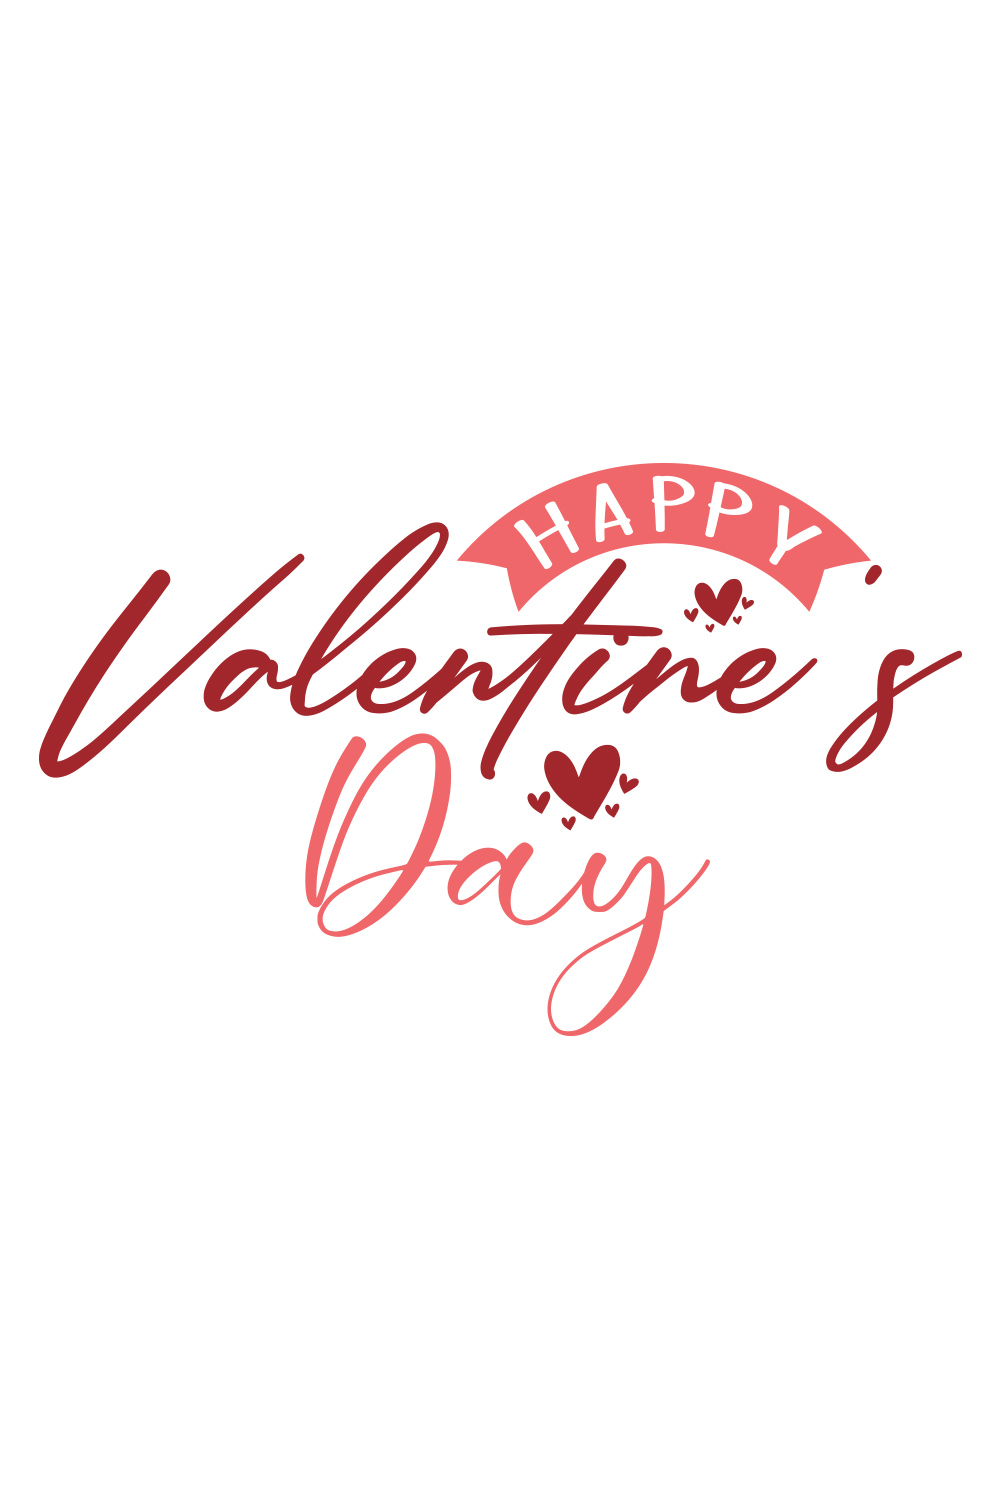 Image with elegant printable lettering Happy Valentines Day